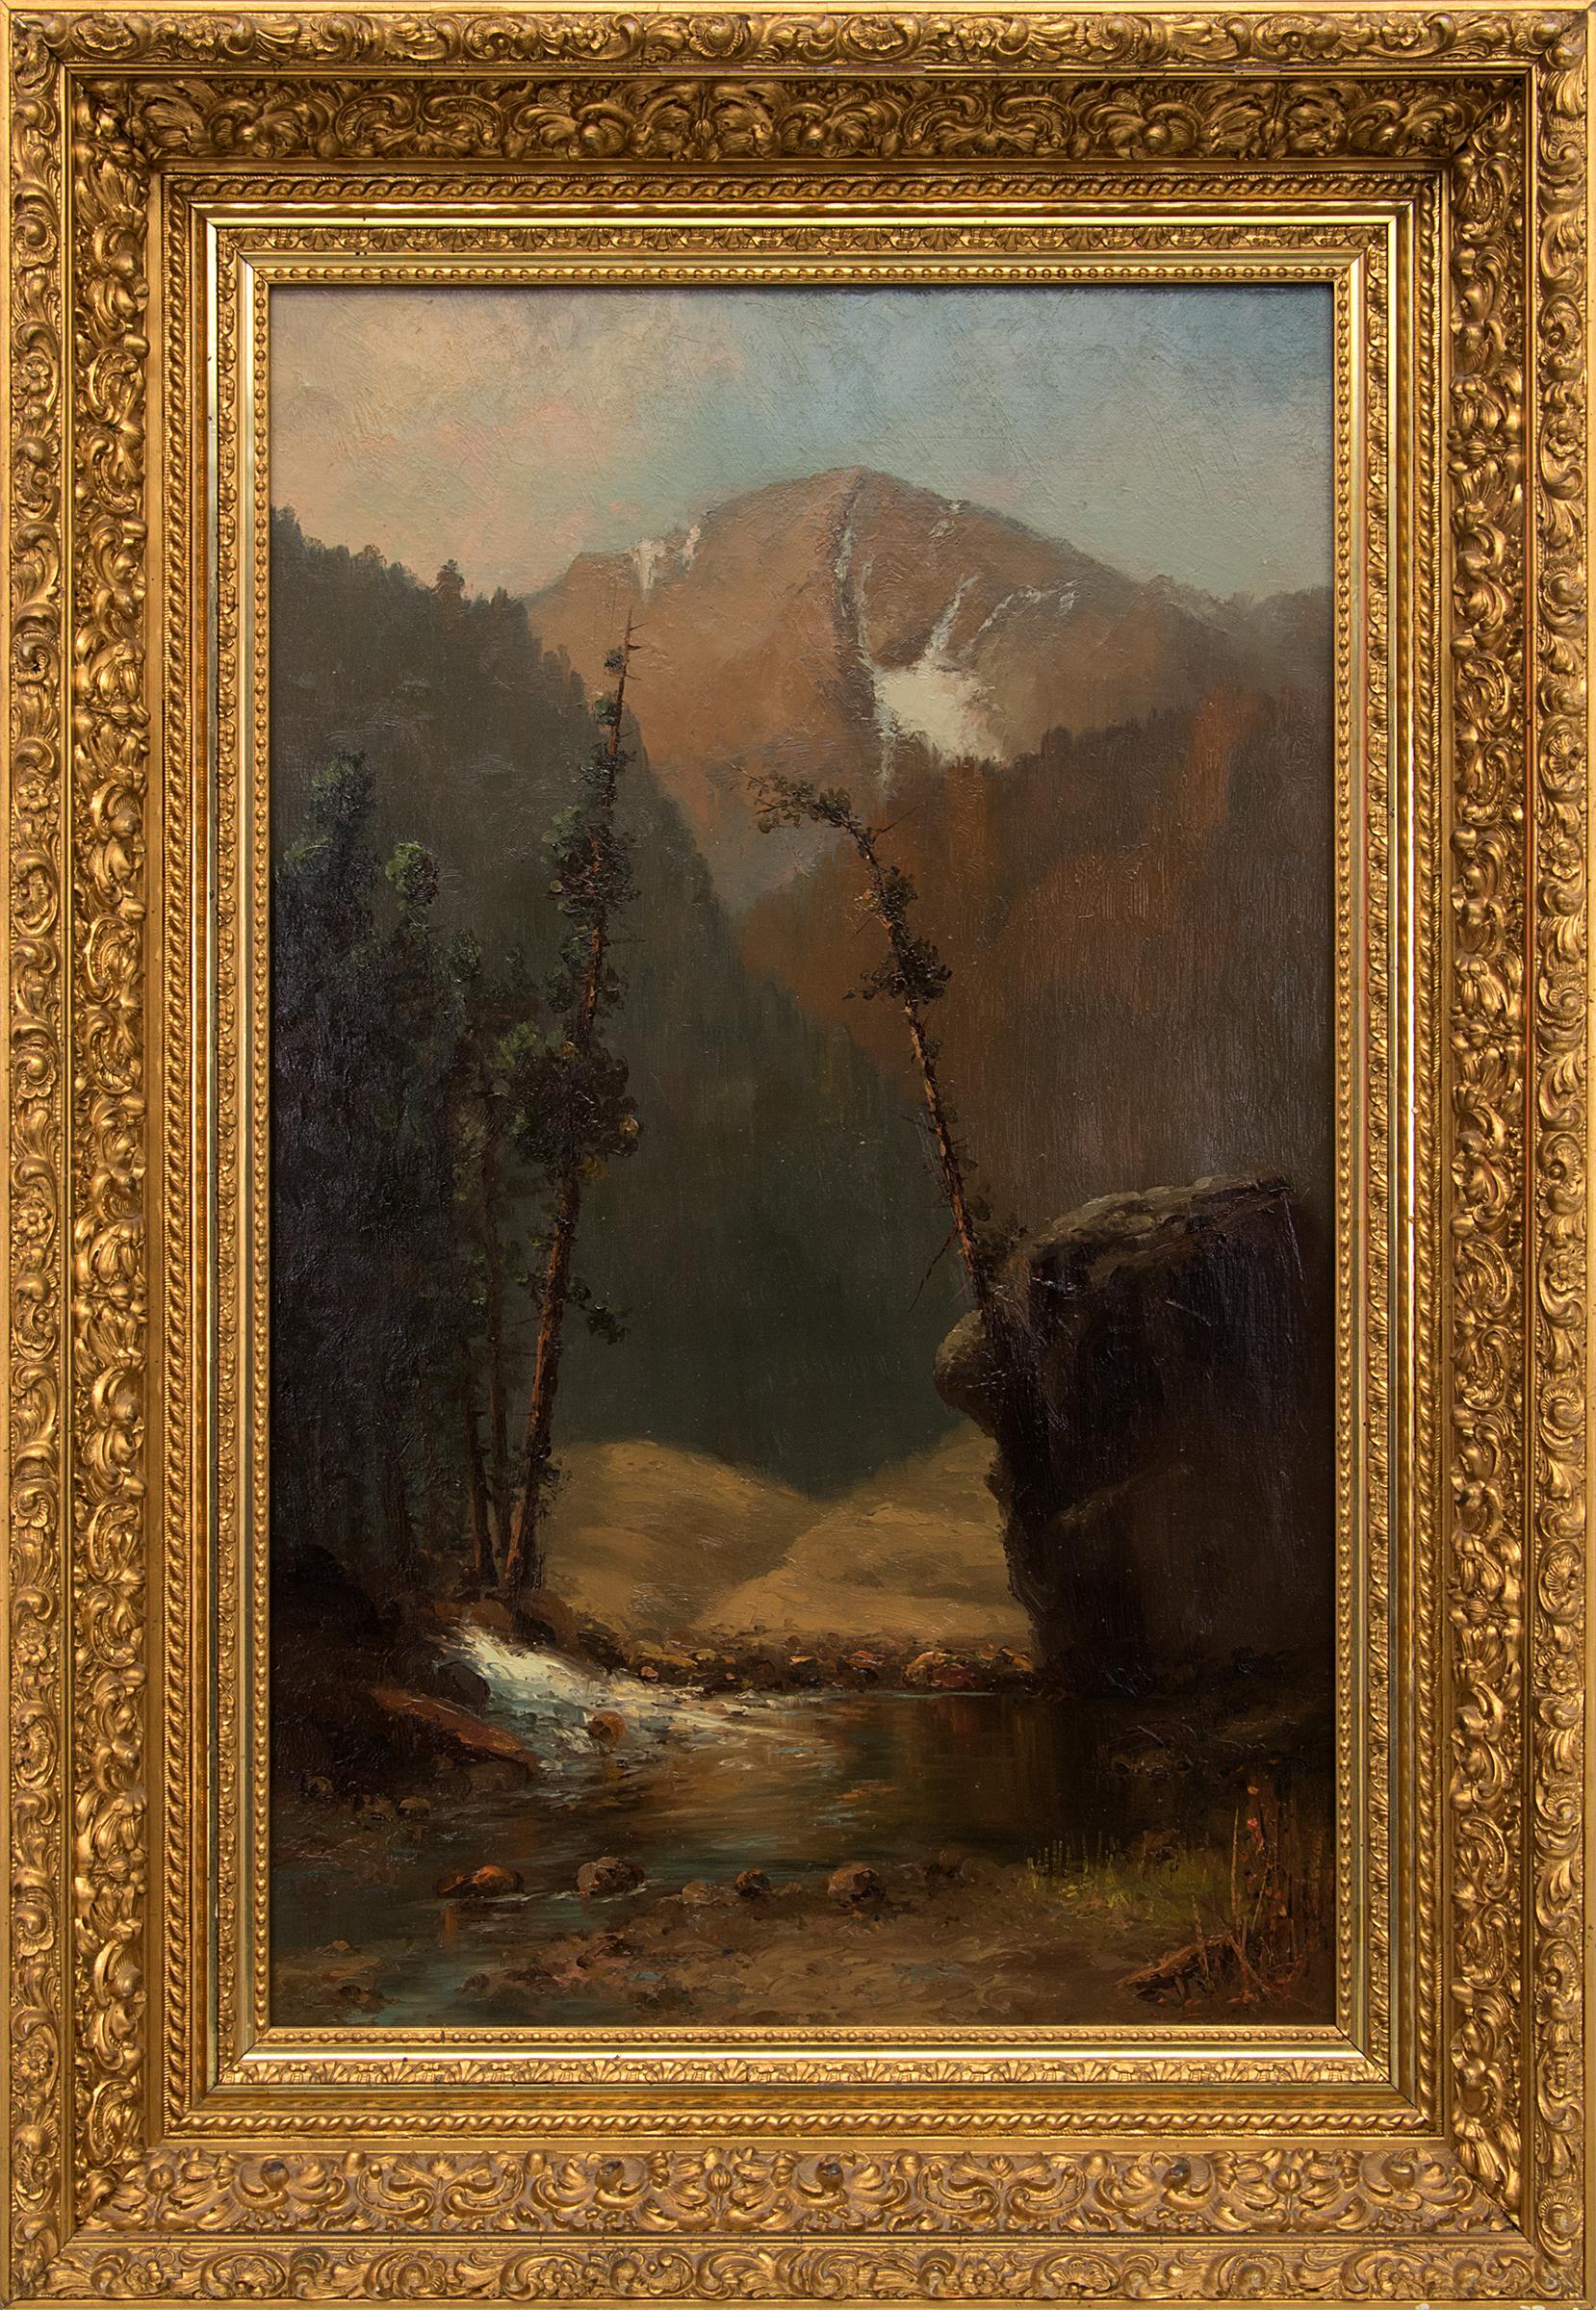 William H. M. (Coxe) Cox Landscape Painting - Untitled (Colorado Mountain Landscape with Stream, Hudson River Style Painting)